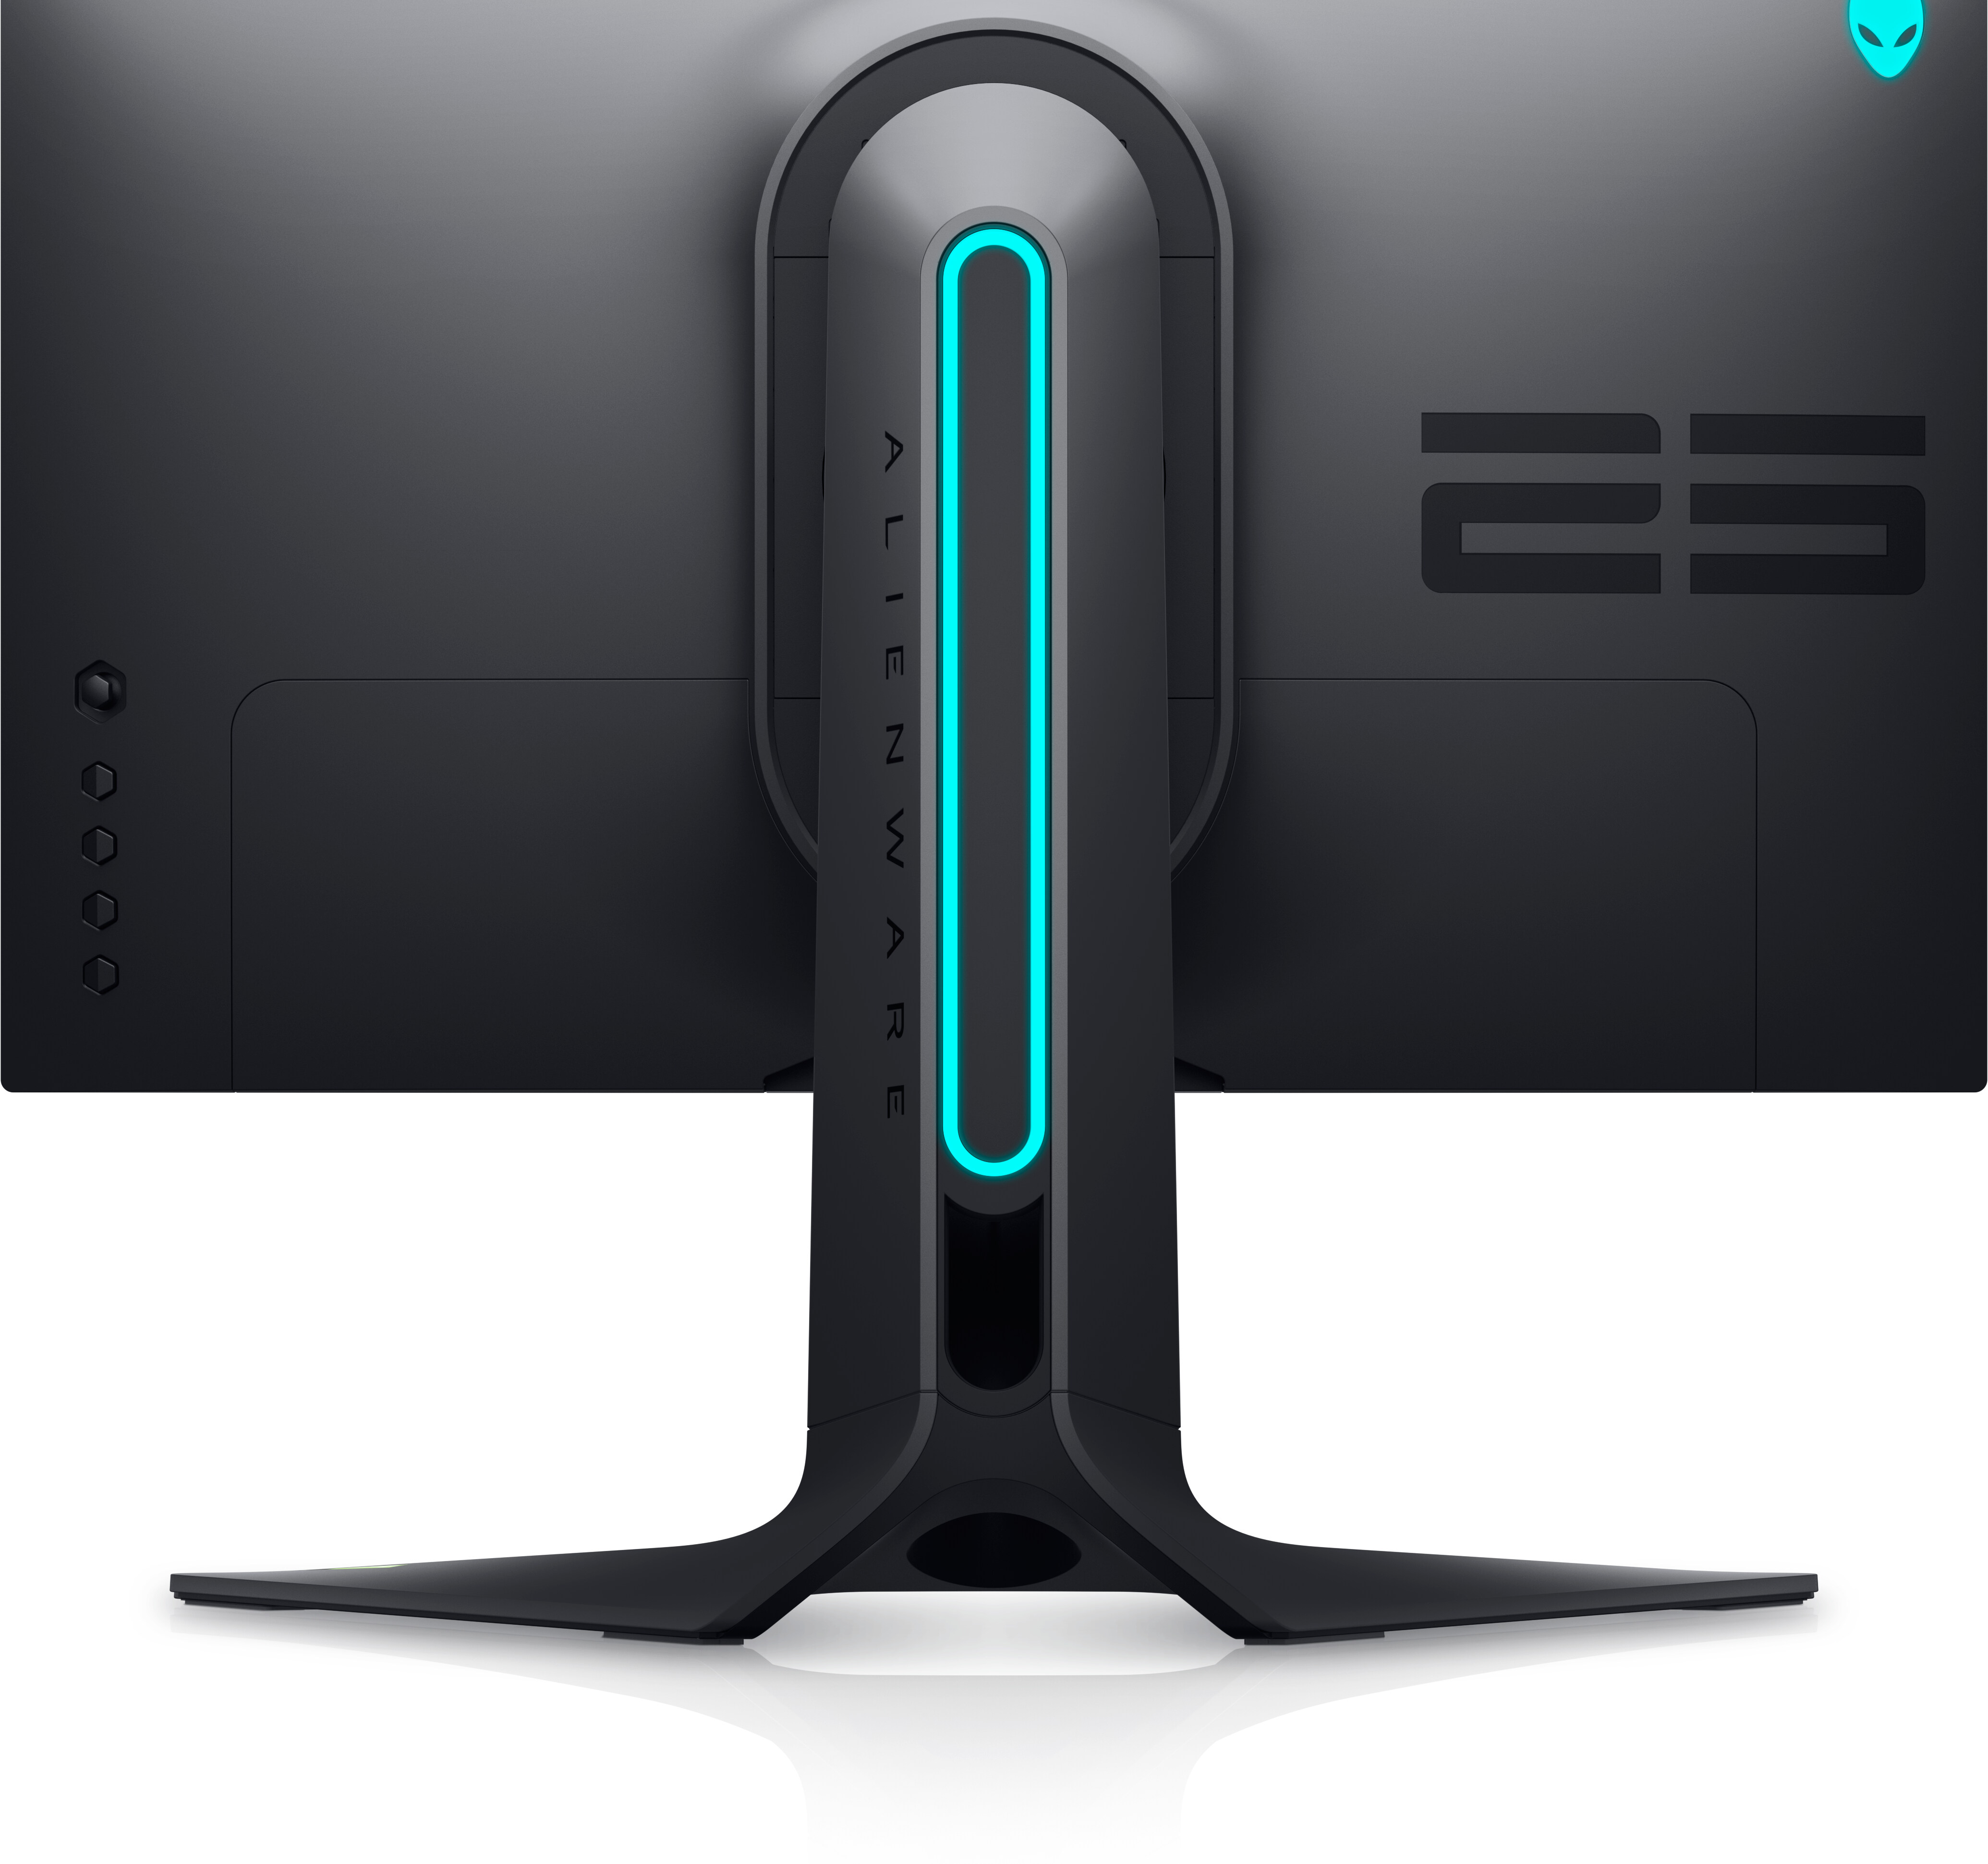 Alienware 25-Inch Gaming Monitor – AW2521H | Dell USA